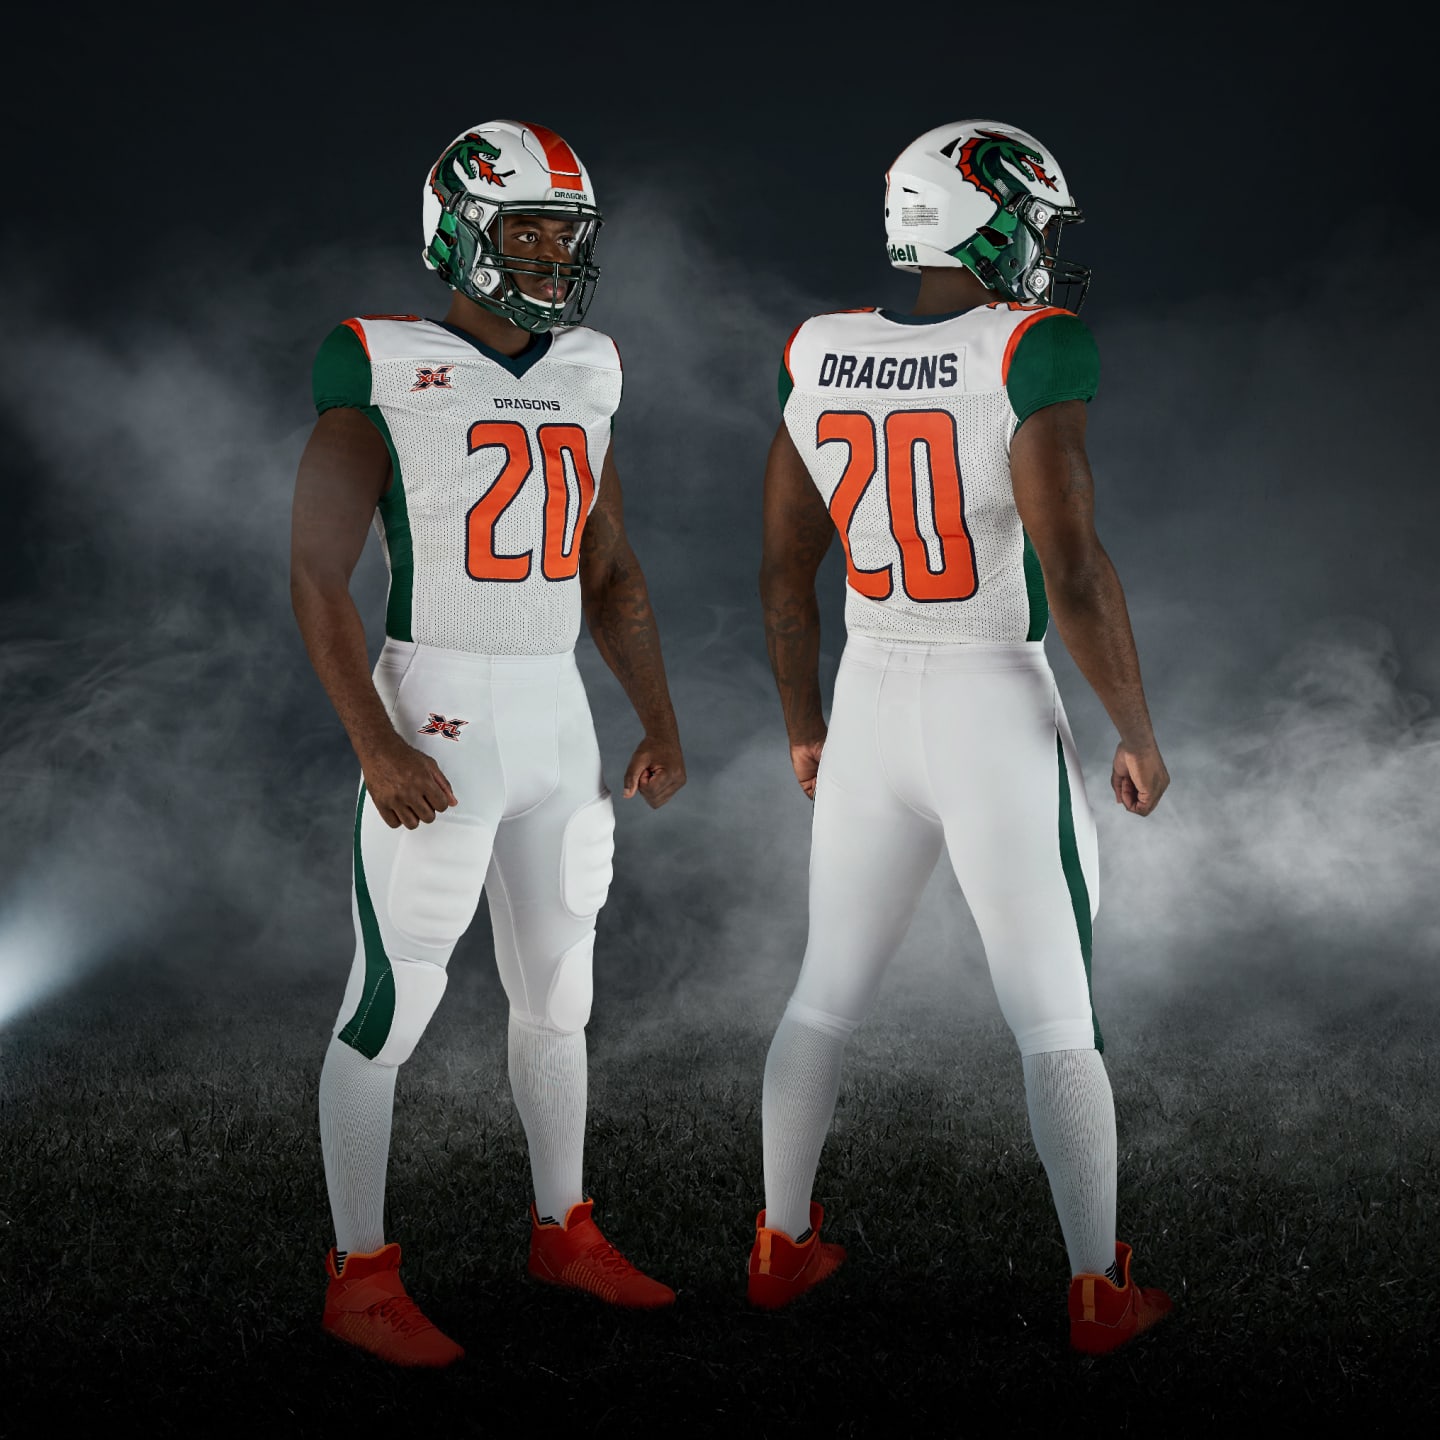 Seattle Dragons jerseys concept, it was by far the hardest color  combination to put on a concept jersey, I like the end result though.  Thoughts? : r/xfl